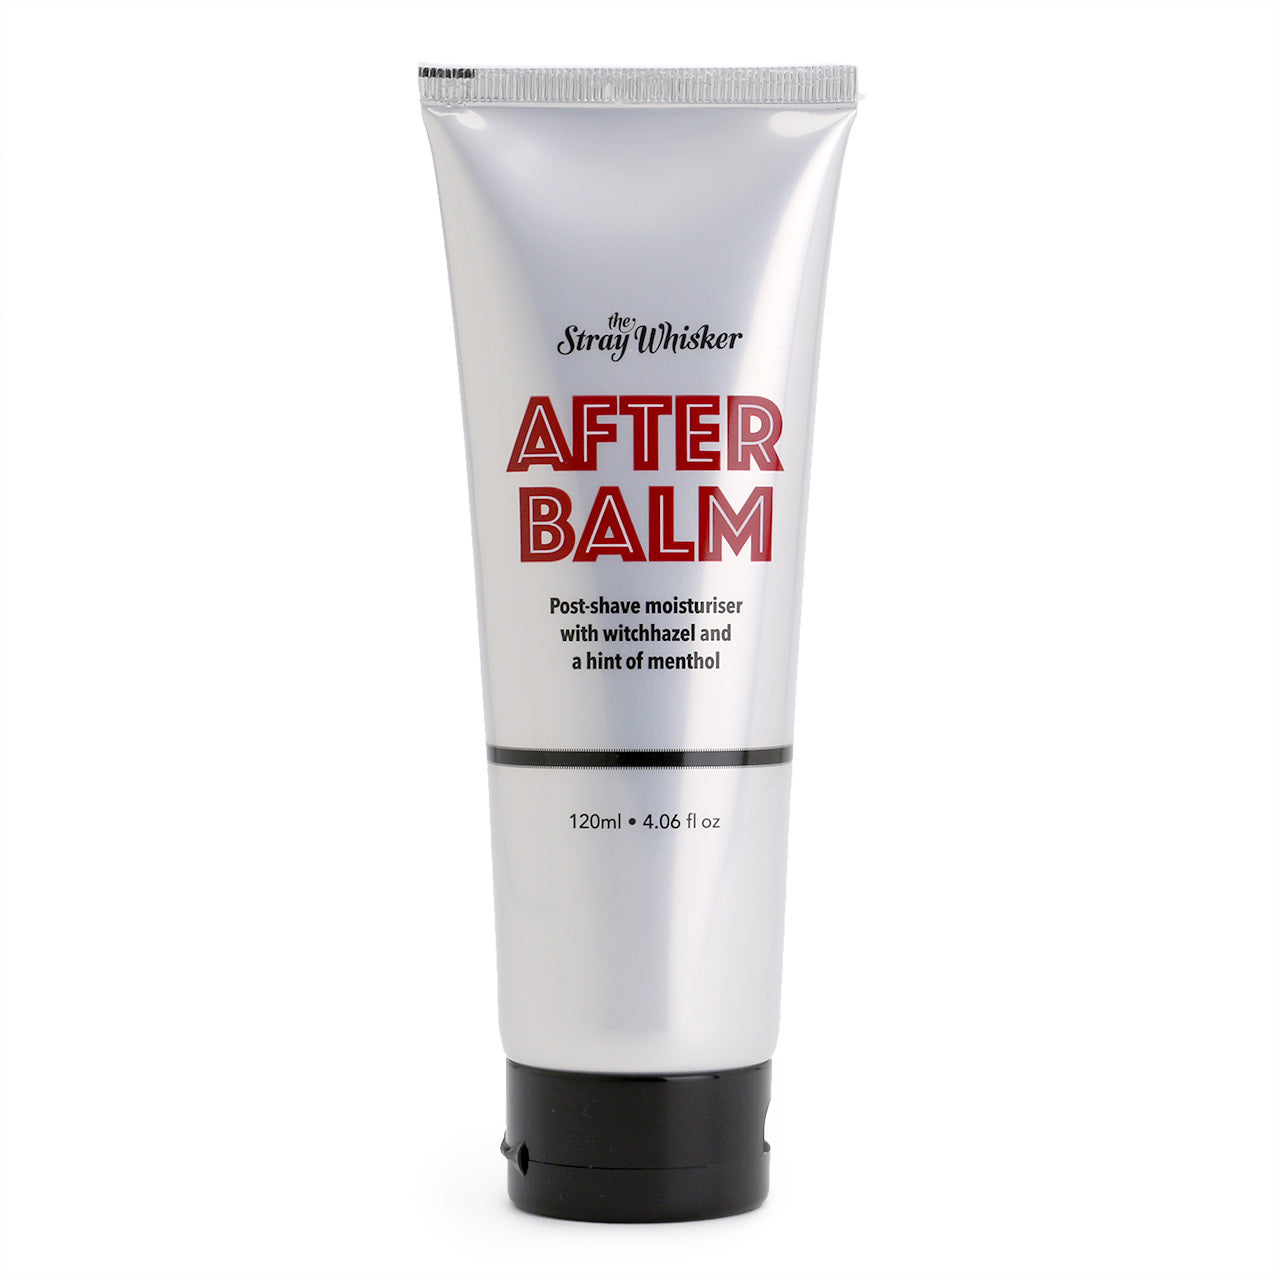 After Balm - Aftershave Balm | The Whisker